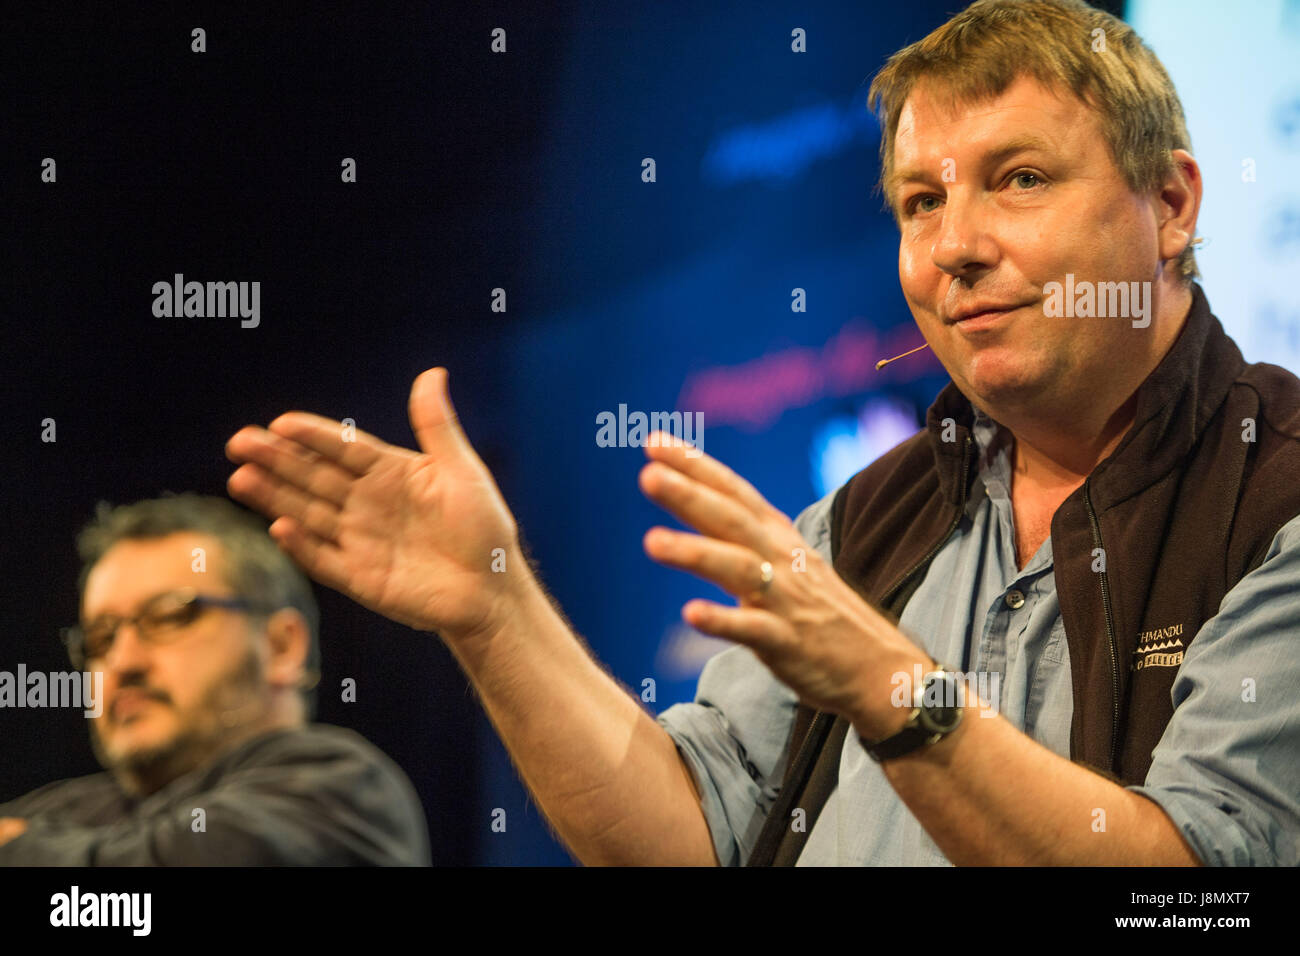 Hay Festival, Wales UK, Monday 29 May 2017 DANNY DORLING, professor of geography at Oxford University, taking about the eed to change the way students and schoolchildren are examined and assessed academically at the Hay Festival 2017 Now in its 30th year, the festival draws tens of thousand of visitors a day to what was described by former US president Bill Clinton as 'the woodstock of the mind' Photo credit Credit: keith morris/Alamy Live News Stock Photo